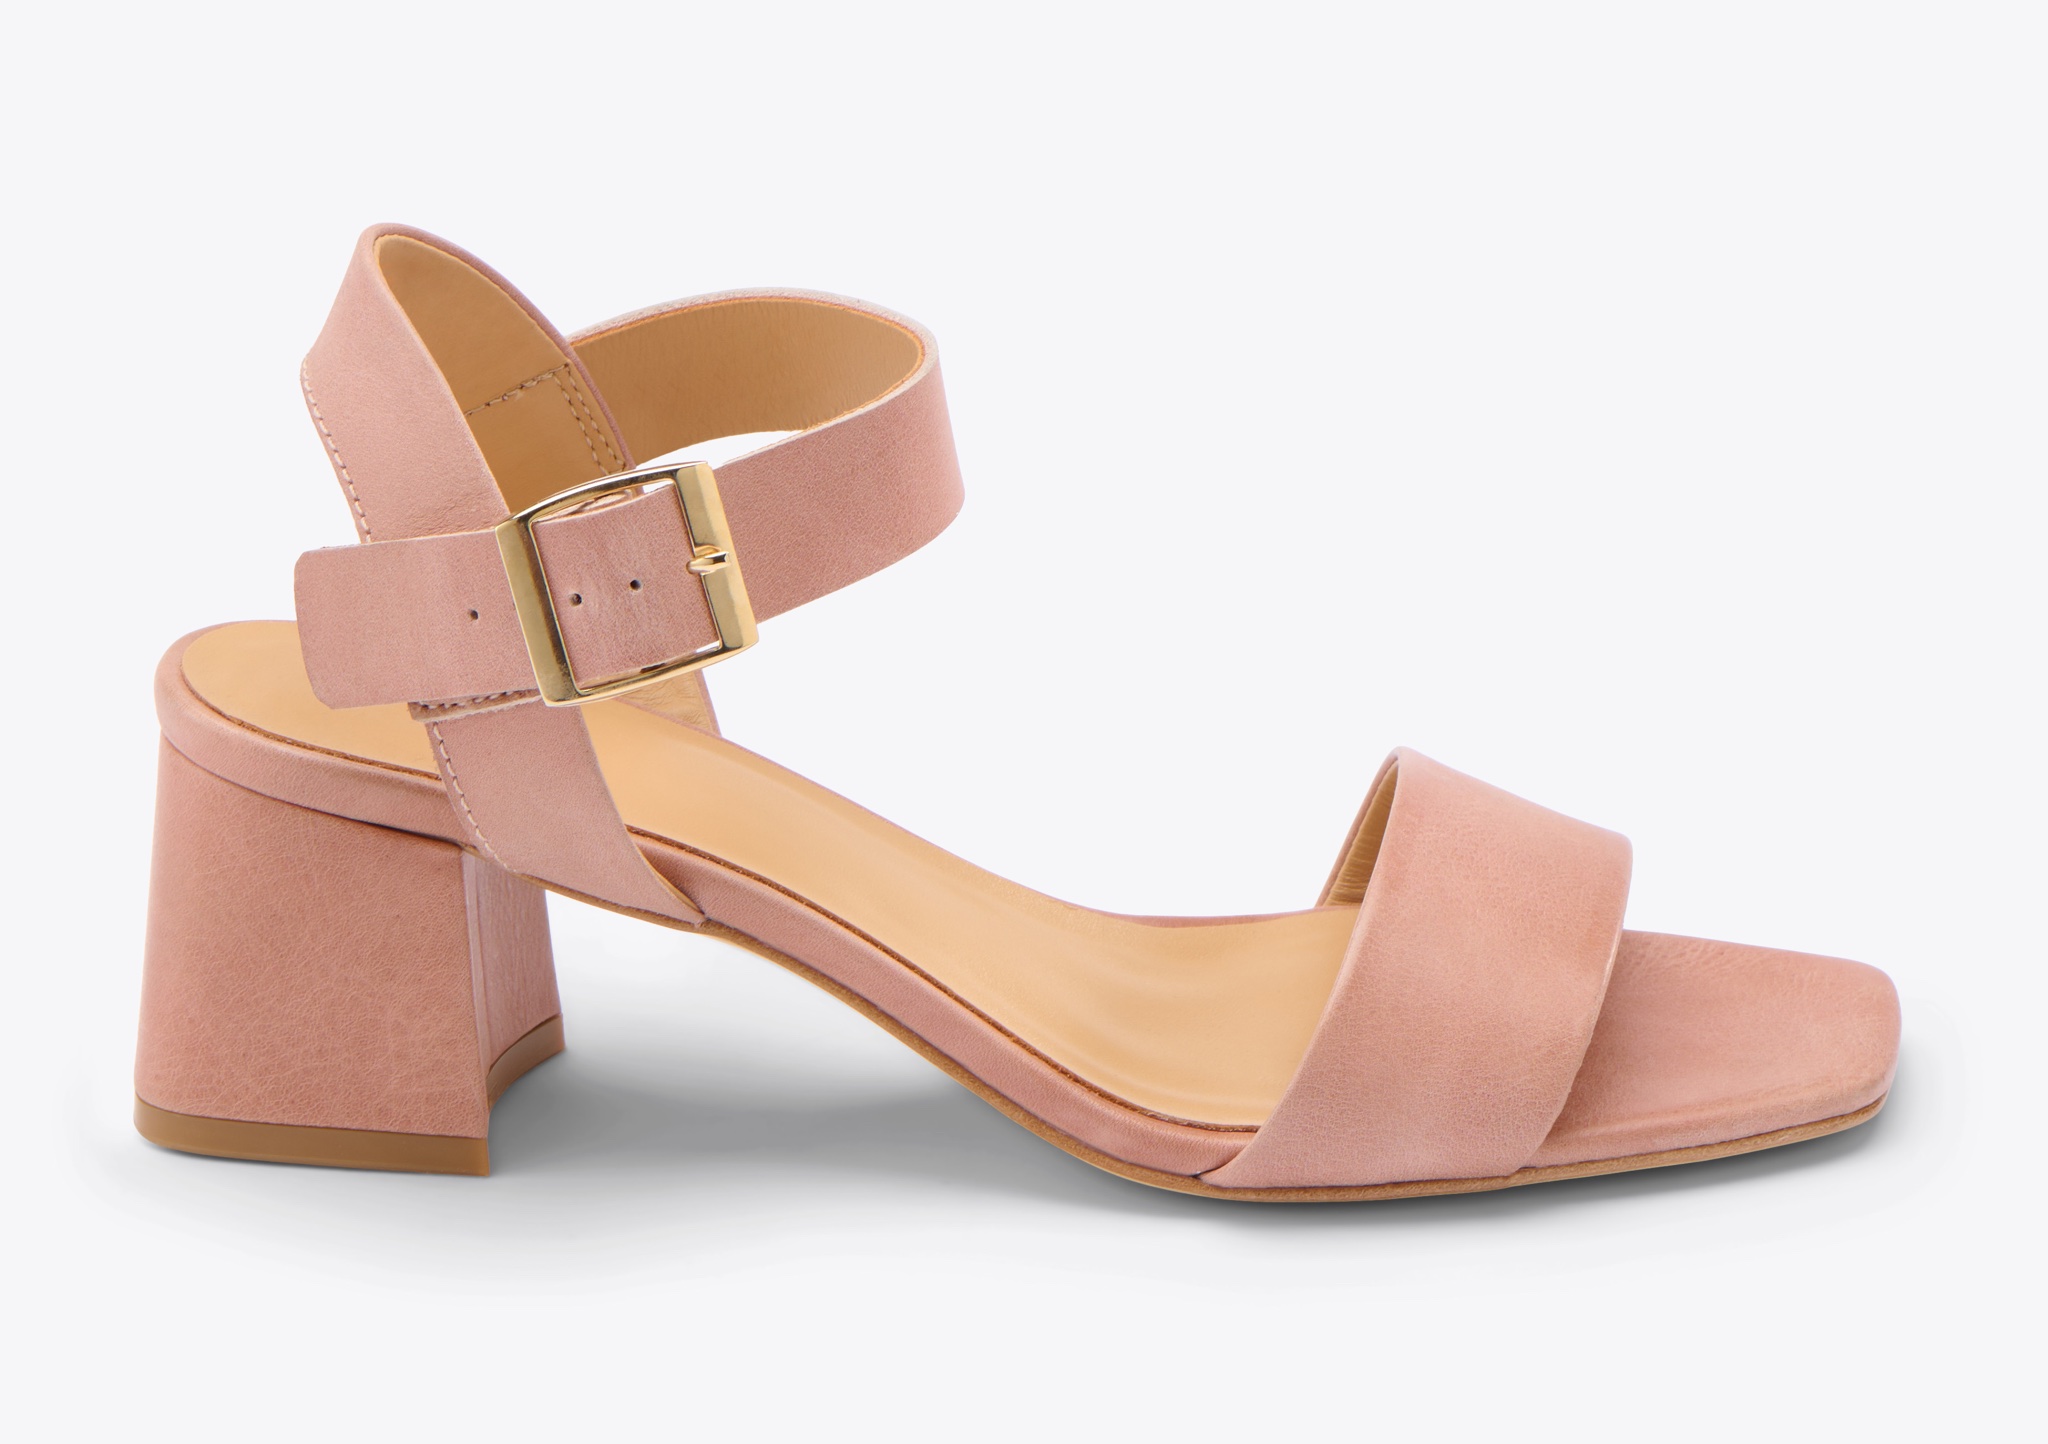 Nisolo Stella Go-To Block Heel Sandal Desert Rose - Every Nisolo product is built on the foundation of comfort, function, and design. 